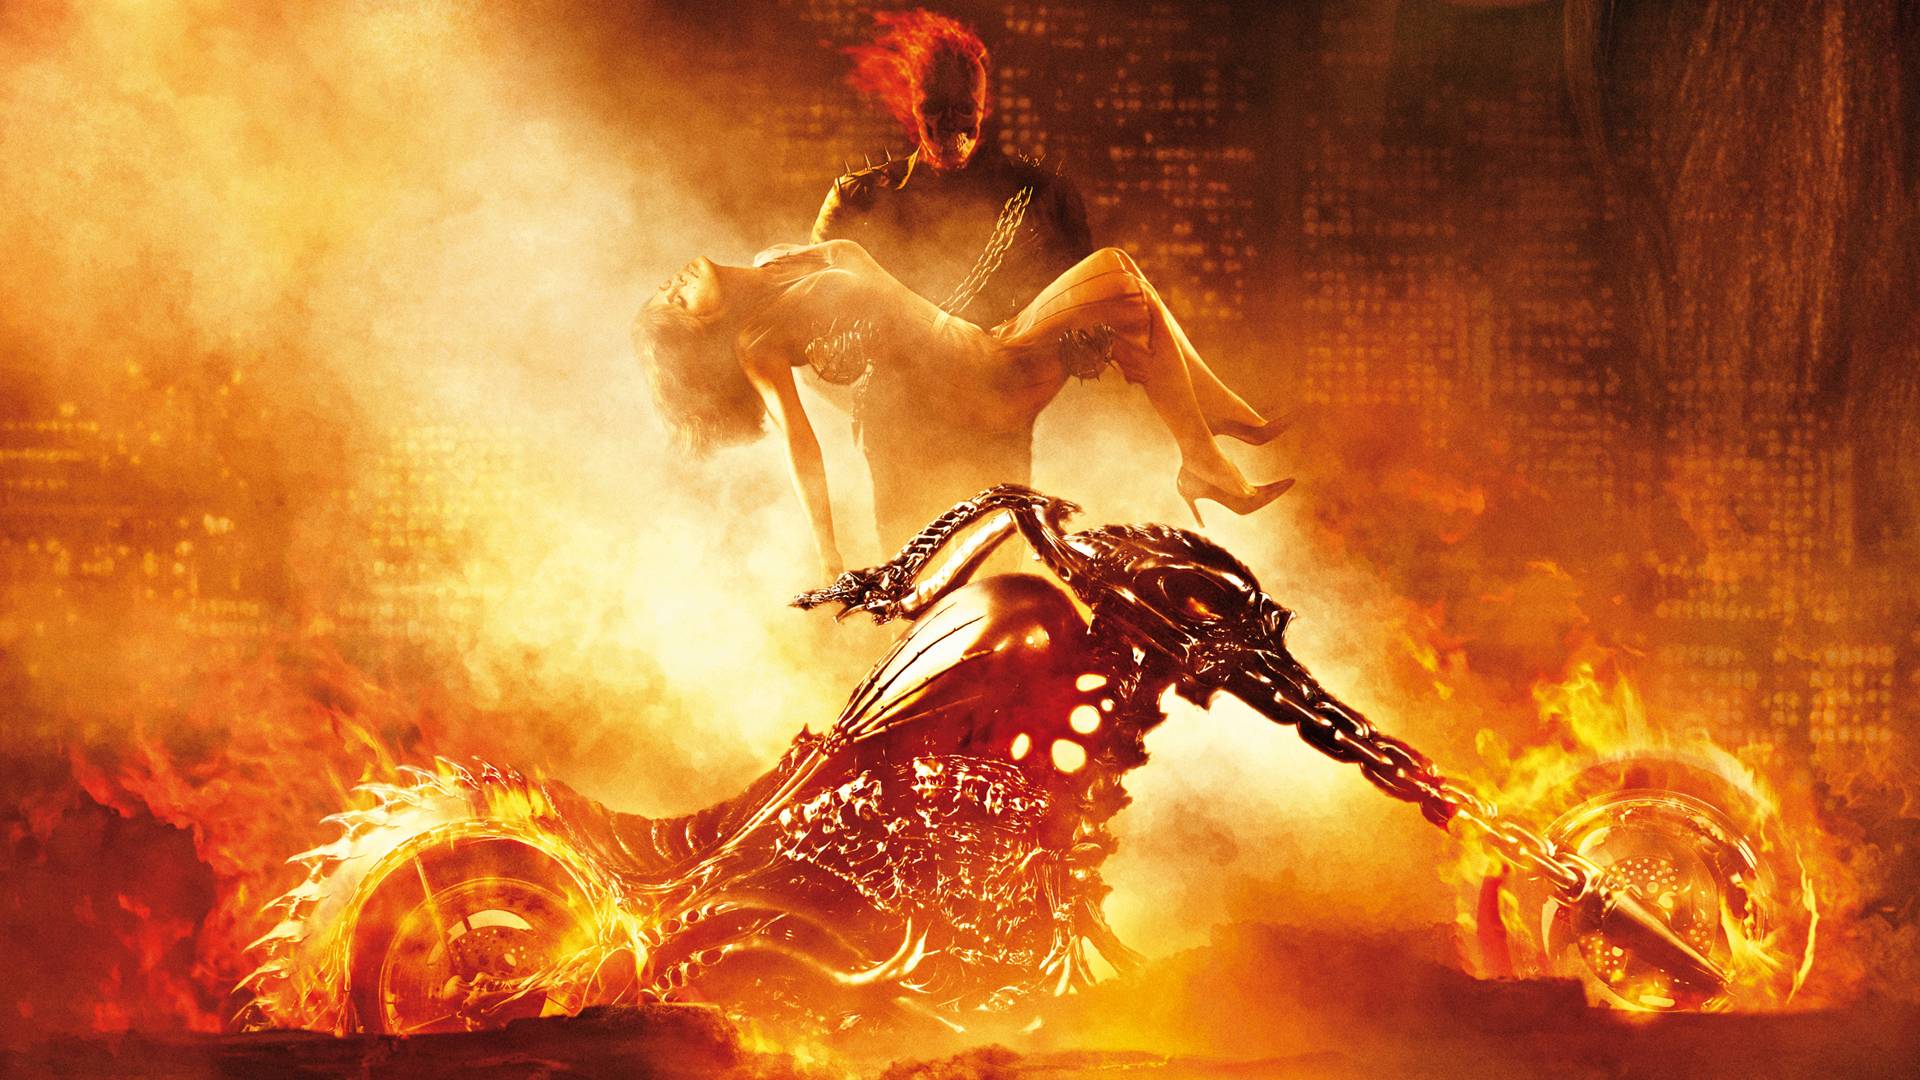 Ghost Rider Wallpapers 1920x1080, - HD Wallpaper 